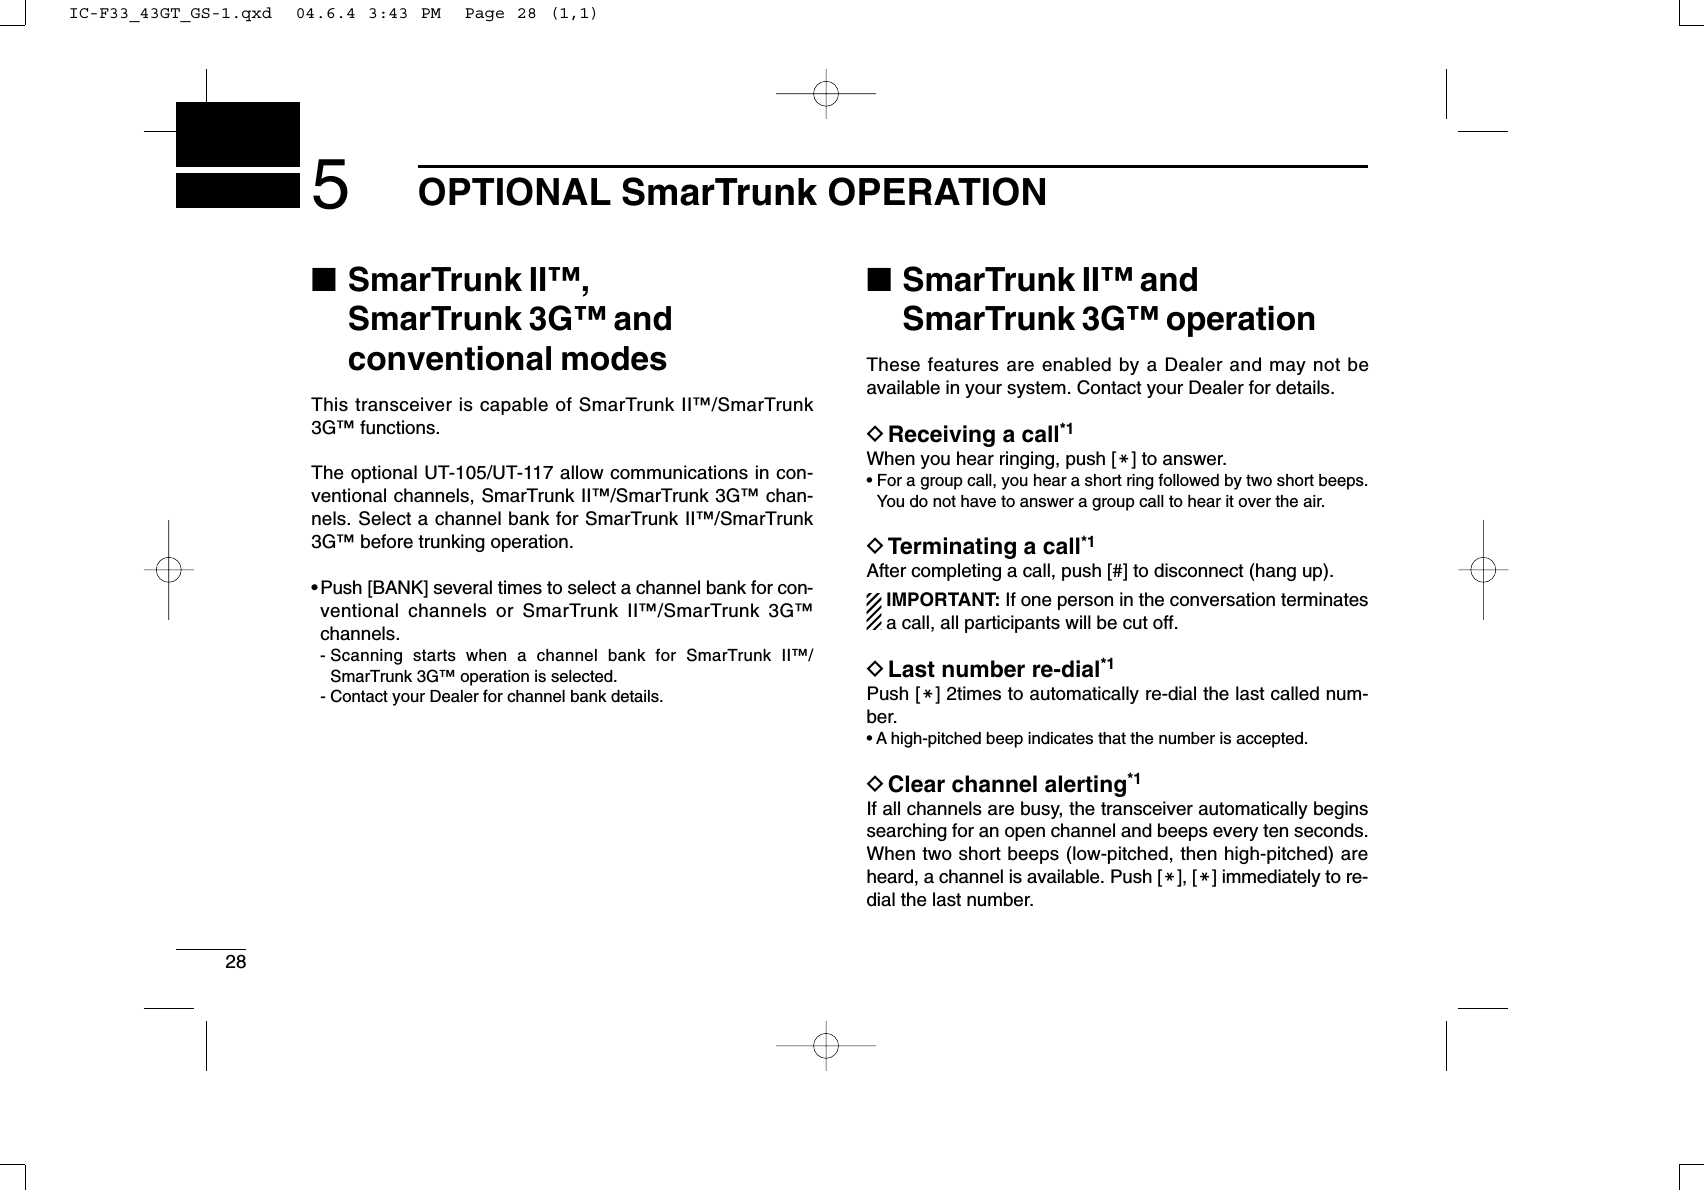 285OPTIONAL SmarTrunk OPERATION■SmarTrunk II™, SmarTrunk 3G™and conventional modesThis transceiver is capable of SmarTrunk II™/SmarTrunk3G™functions.The optional UT-105/UT-117 allow communications in con-ventional channels, SmarTrunk II™/SmarTrunk 3G™chan-nels. Select a channel bank for SmarTrunk II™/SmarTrunk3G™before trunking operation.•Push [BANK] several times to select a channel bank for con-ventional channels or SmarTrunk II™/SmarTrunk 3G™channels.- Scanning starts when a channel bank for SmarTrunk II™/SmarTrunk 3G™operation is selected.- Contact your Dealer for channel bank details.■SmarTrunk II™and SmarTrunk 3G™operationThese features are enabled by a Dealer and may not beavailable in your system. Contact your Dealer for details.DReceiving a call*1When you hear ringing, push [M] to answer.• For a group call, you hear a short ring followed by two short beeps.You do not have to answer a group call to hear it over the air.DTerminating a call*1After completing a call, push [#] to disconnect (hang up).IMPORTANT: If one person in the conversation terminatesa call, all participants will be cut off.DLast number re-dial*1Push [M] 2times to automatically re-dial the last called num-ber.• A high-pitched beep indicates that the number is accepted.DClear channel alerting*1If all channels are busy, the transceiver automatically beginssearching for an open channel and beeps every ten seconds.When two short beeps (low-pitched, then high-pitched) areheard, a channel is available. Push [M], [M] immediately to re-dial the last number.IC-F33_43GT_GS-1.qxd  04.6.4 3:43 PM  Page 28 (1,1)